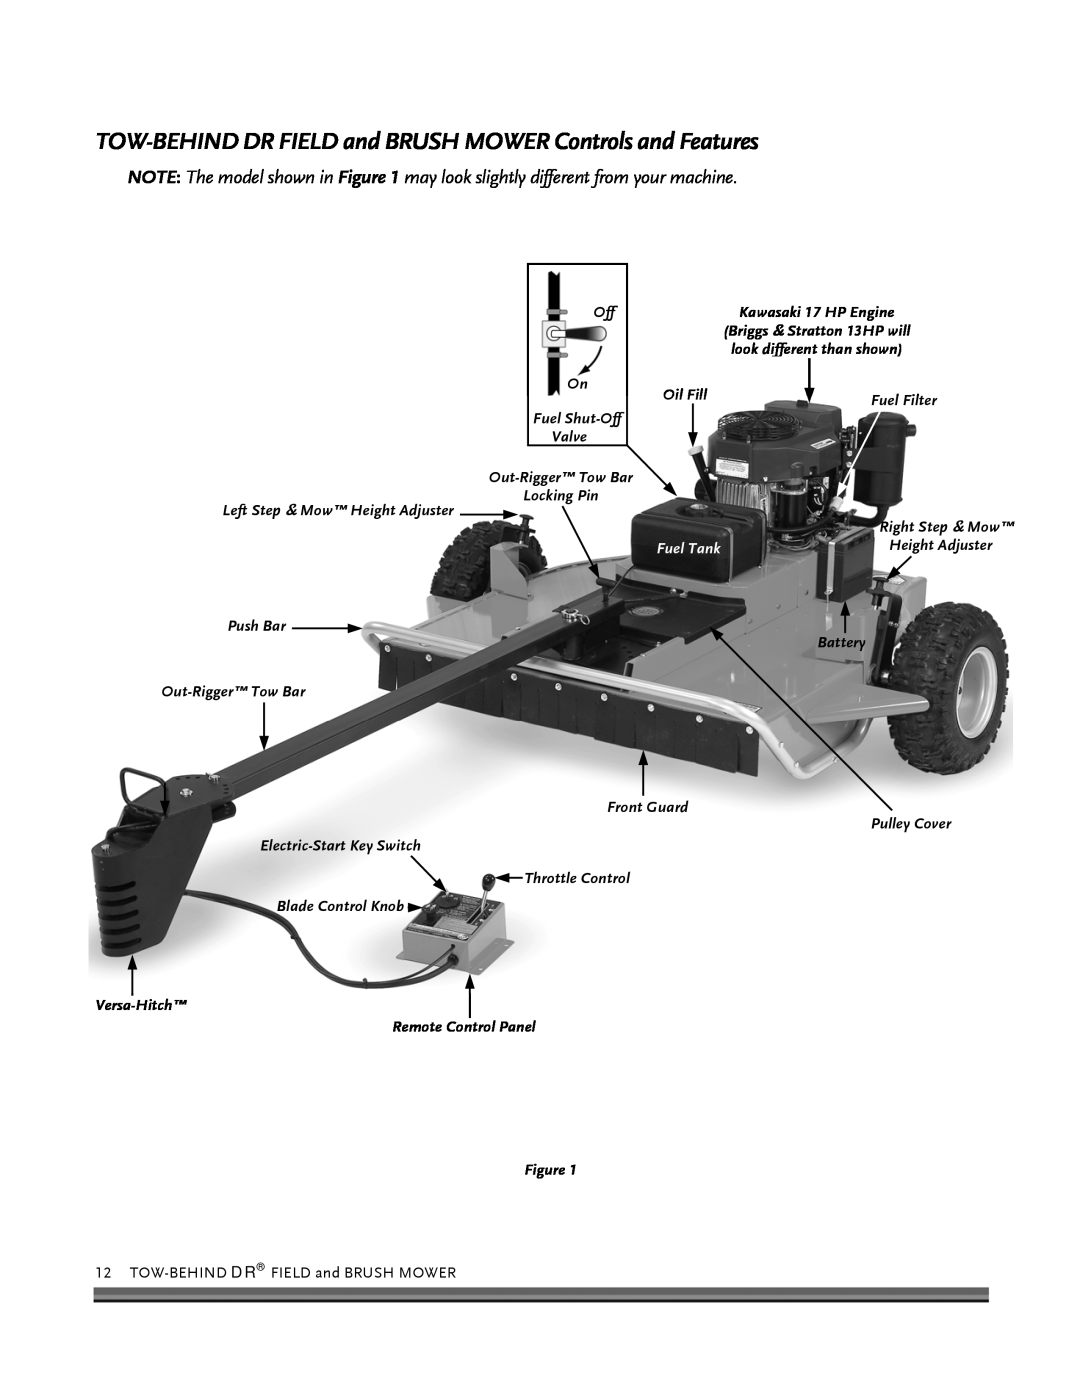 Briggs & Stratton FIELD and BRUSH MOWER manual Off On Oil Fill Fuel Shut-Off Valve 